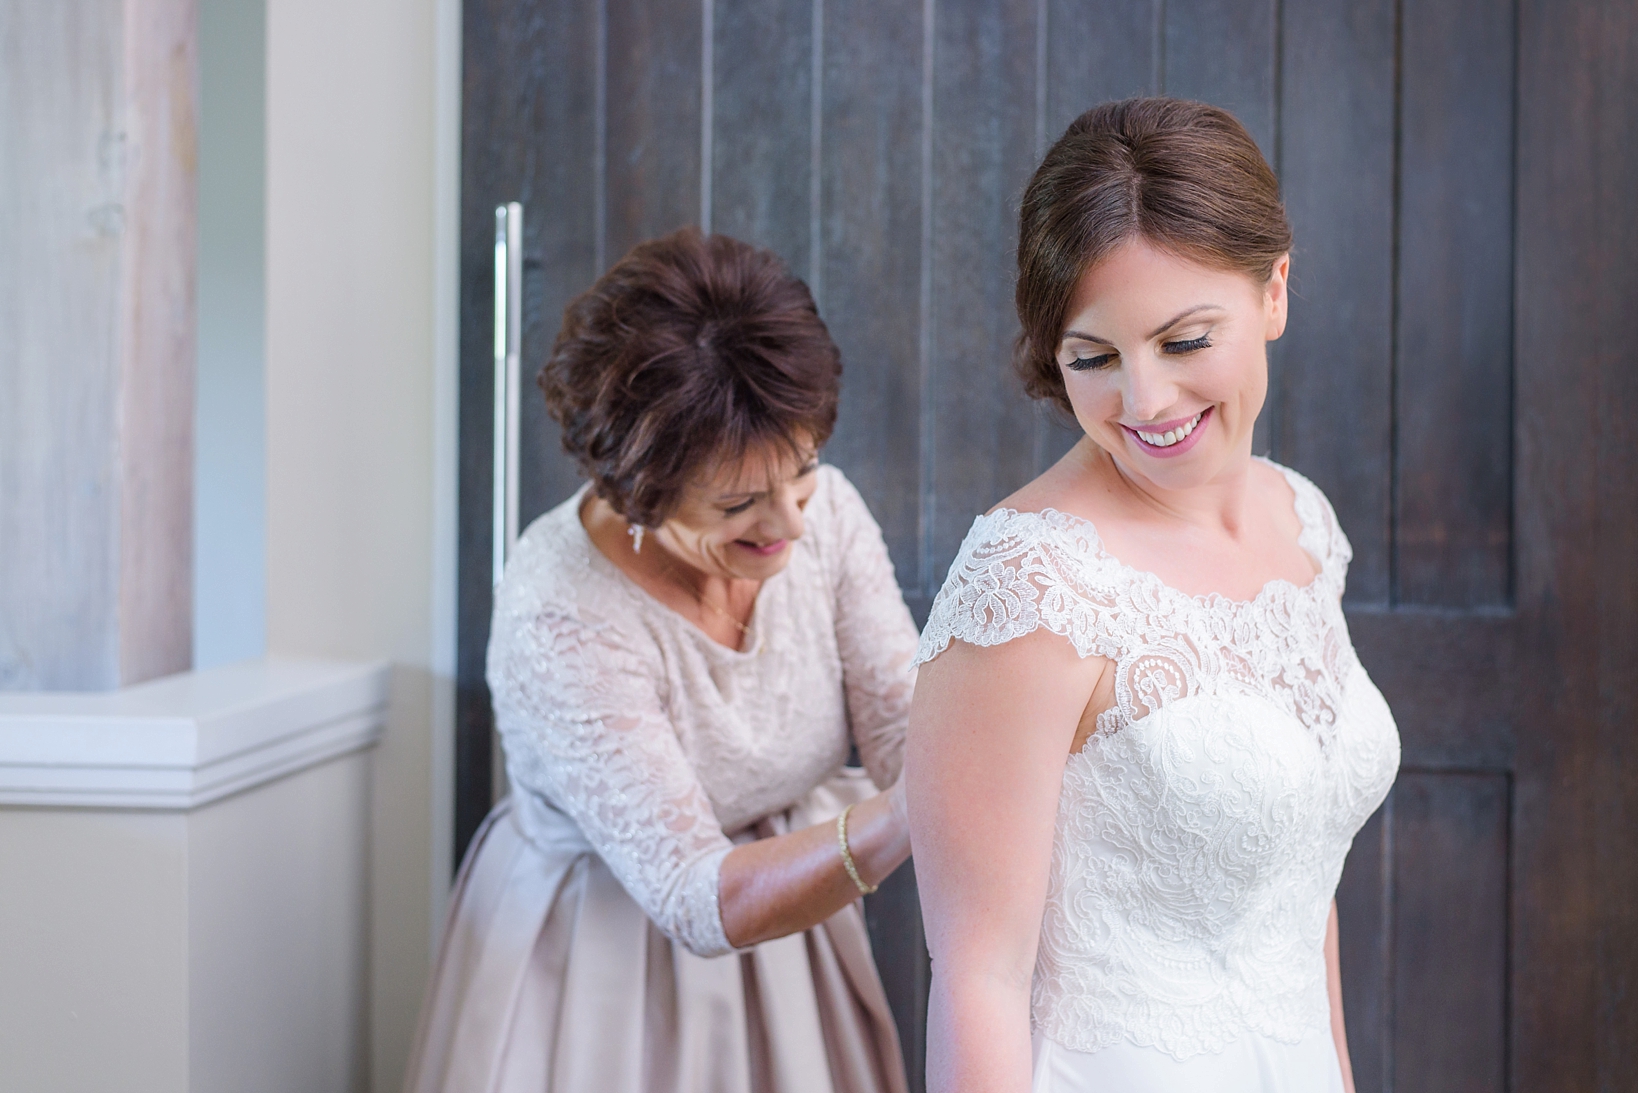 Mother of the Bride helping her daughter into her lacy wedding dress